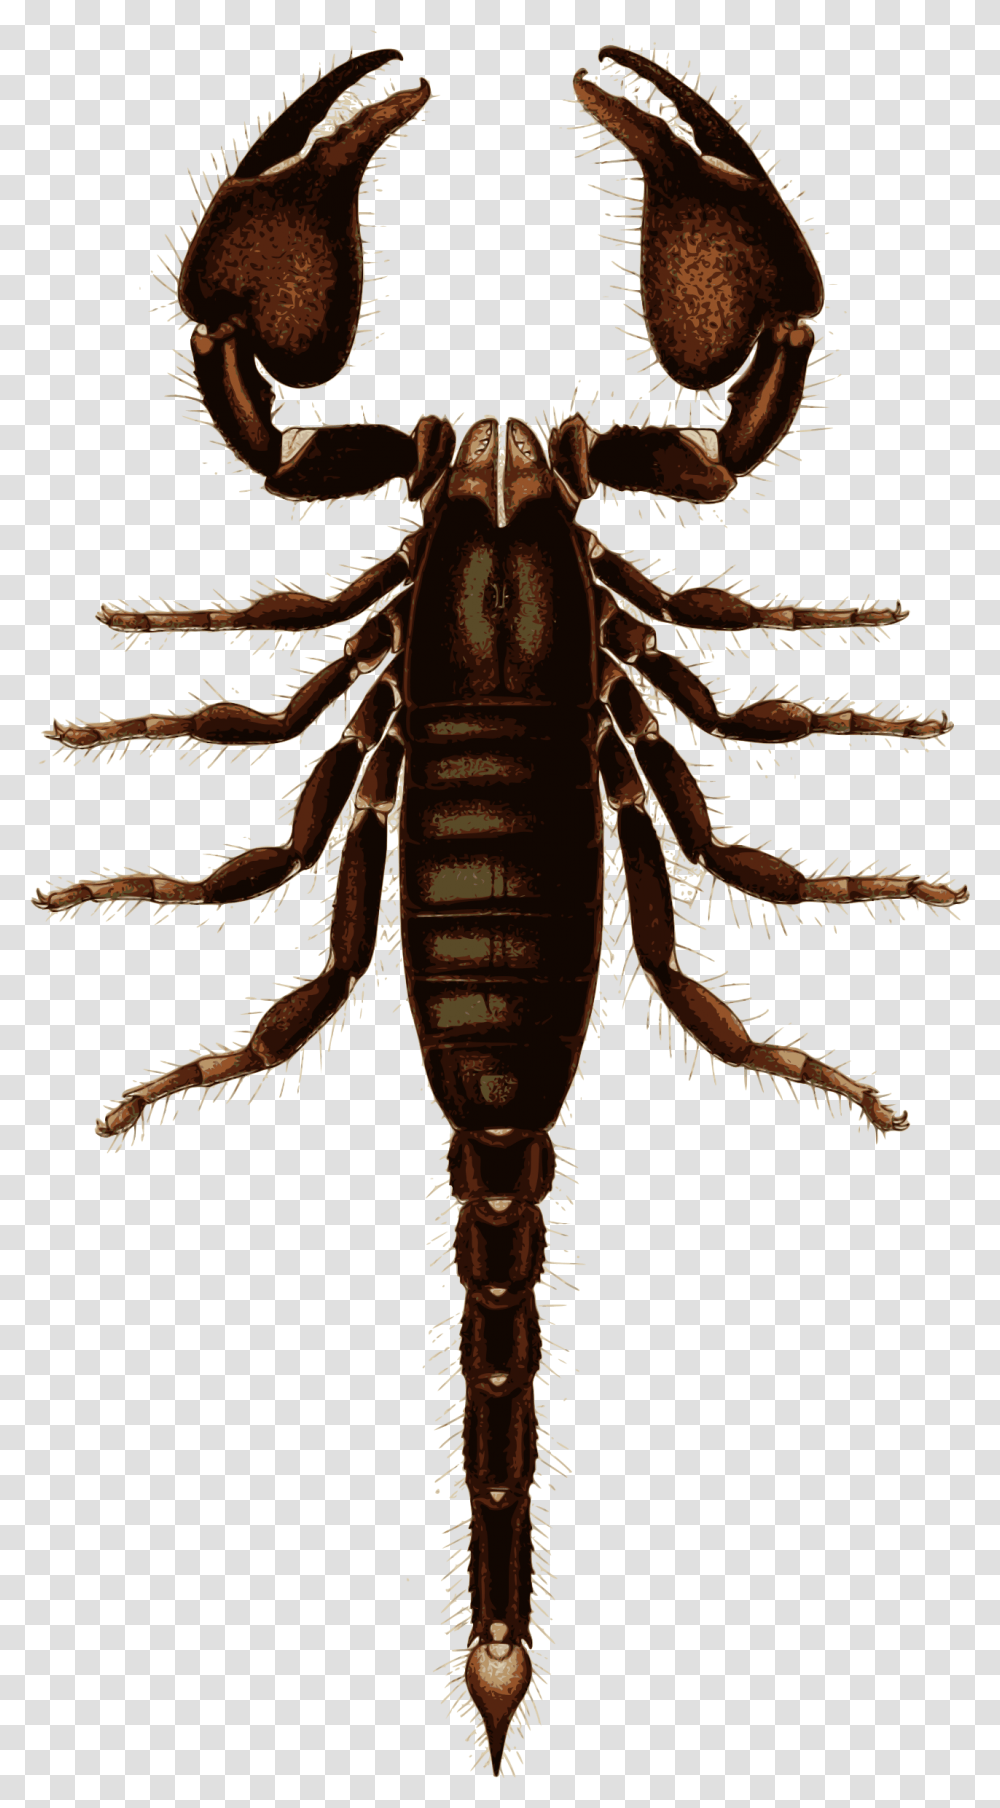 Scorpion Download, Insect, Invertebrate, Animal, Cockroach Transparent Png